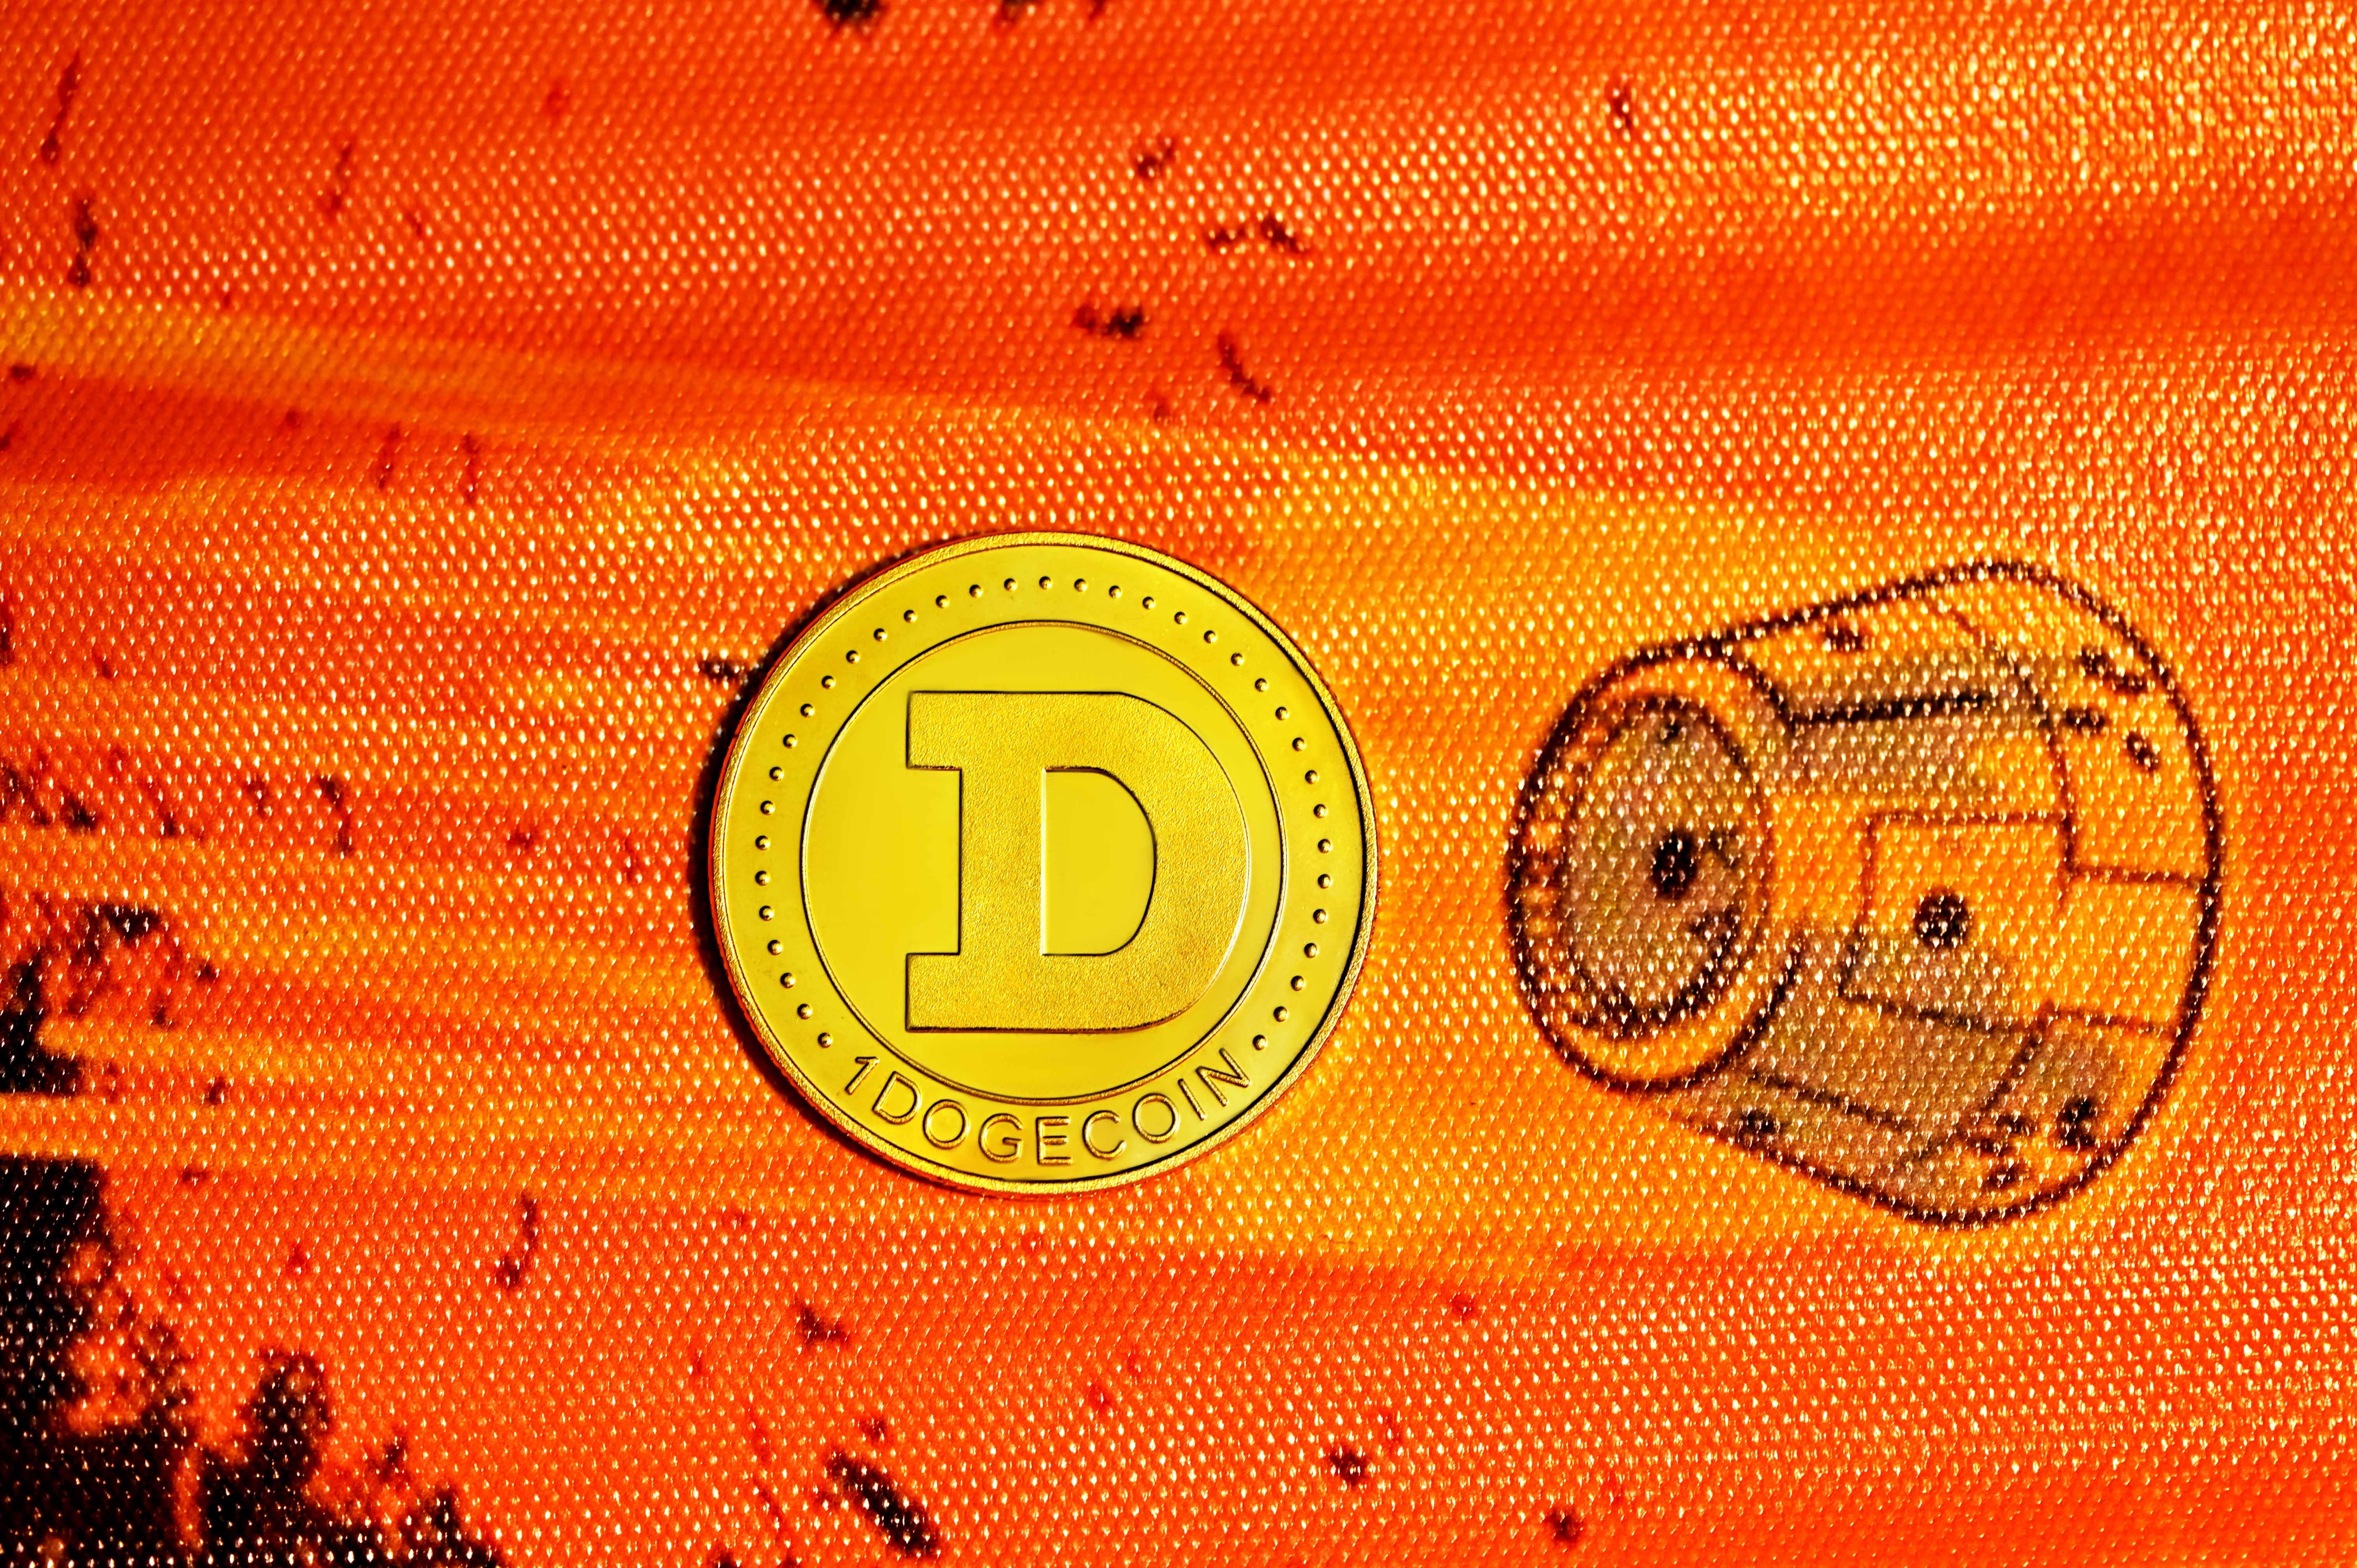 Dogecoin Creator Condemns Promoting Floki Inu: Advertising 'It'll Make You Rich' Is 'Slimy AF'